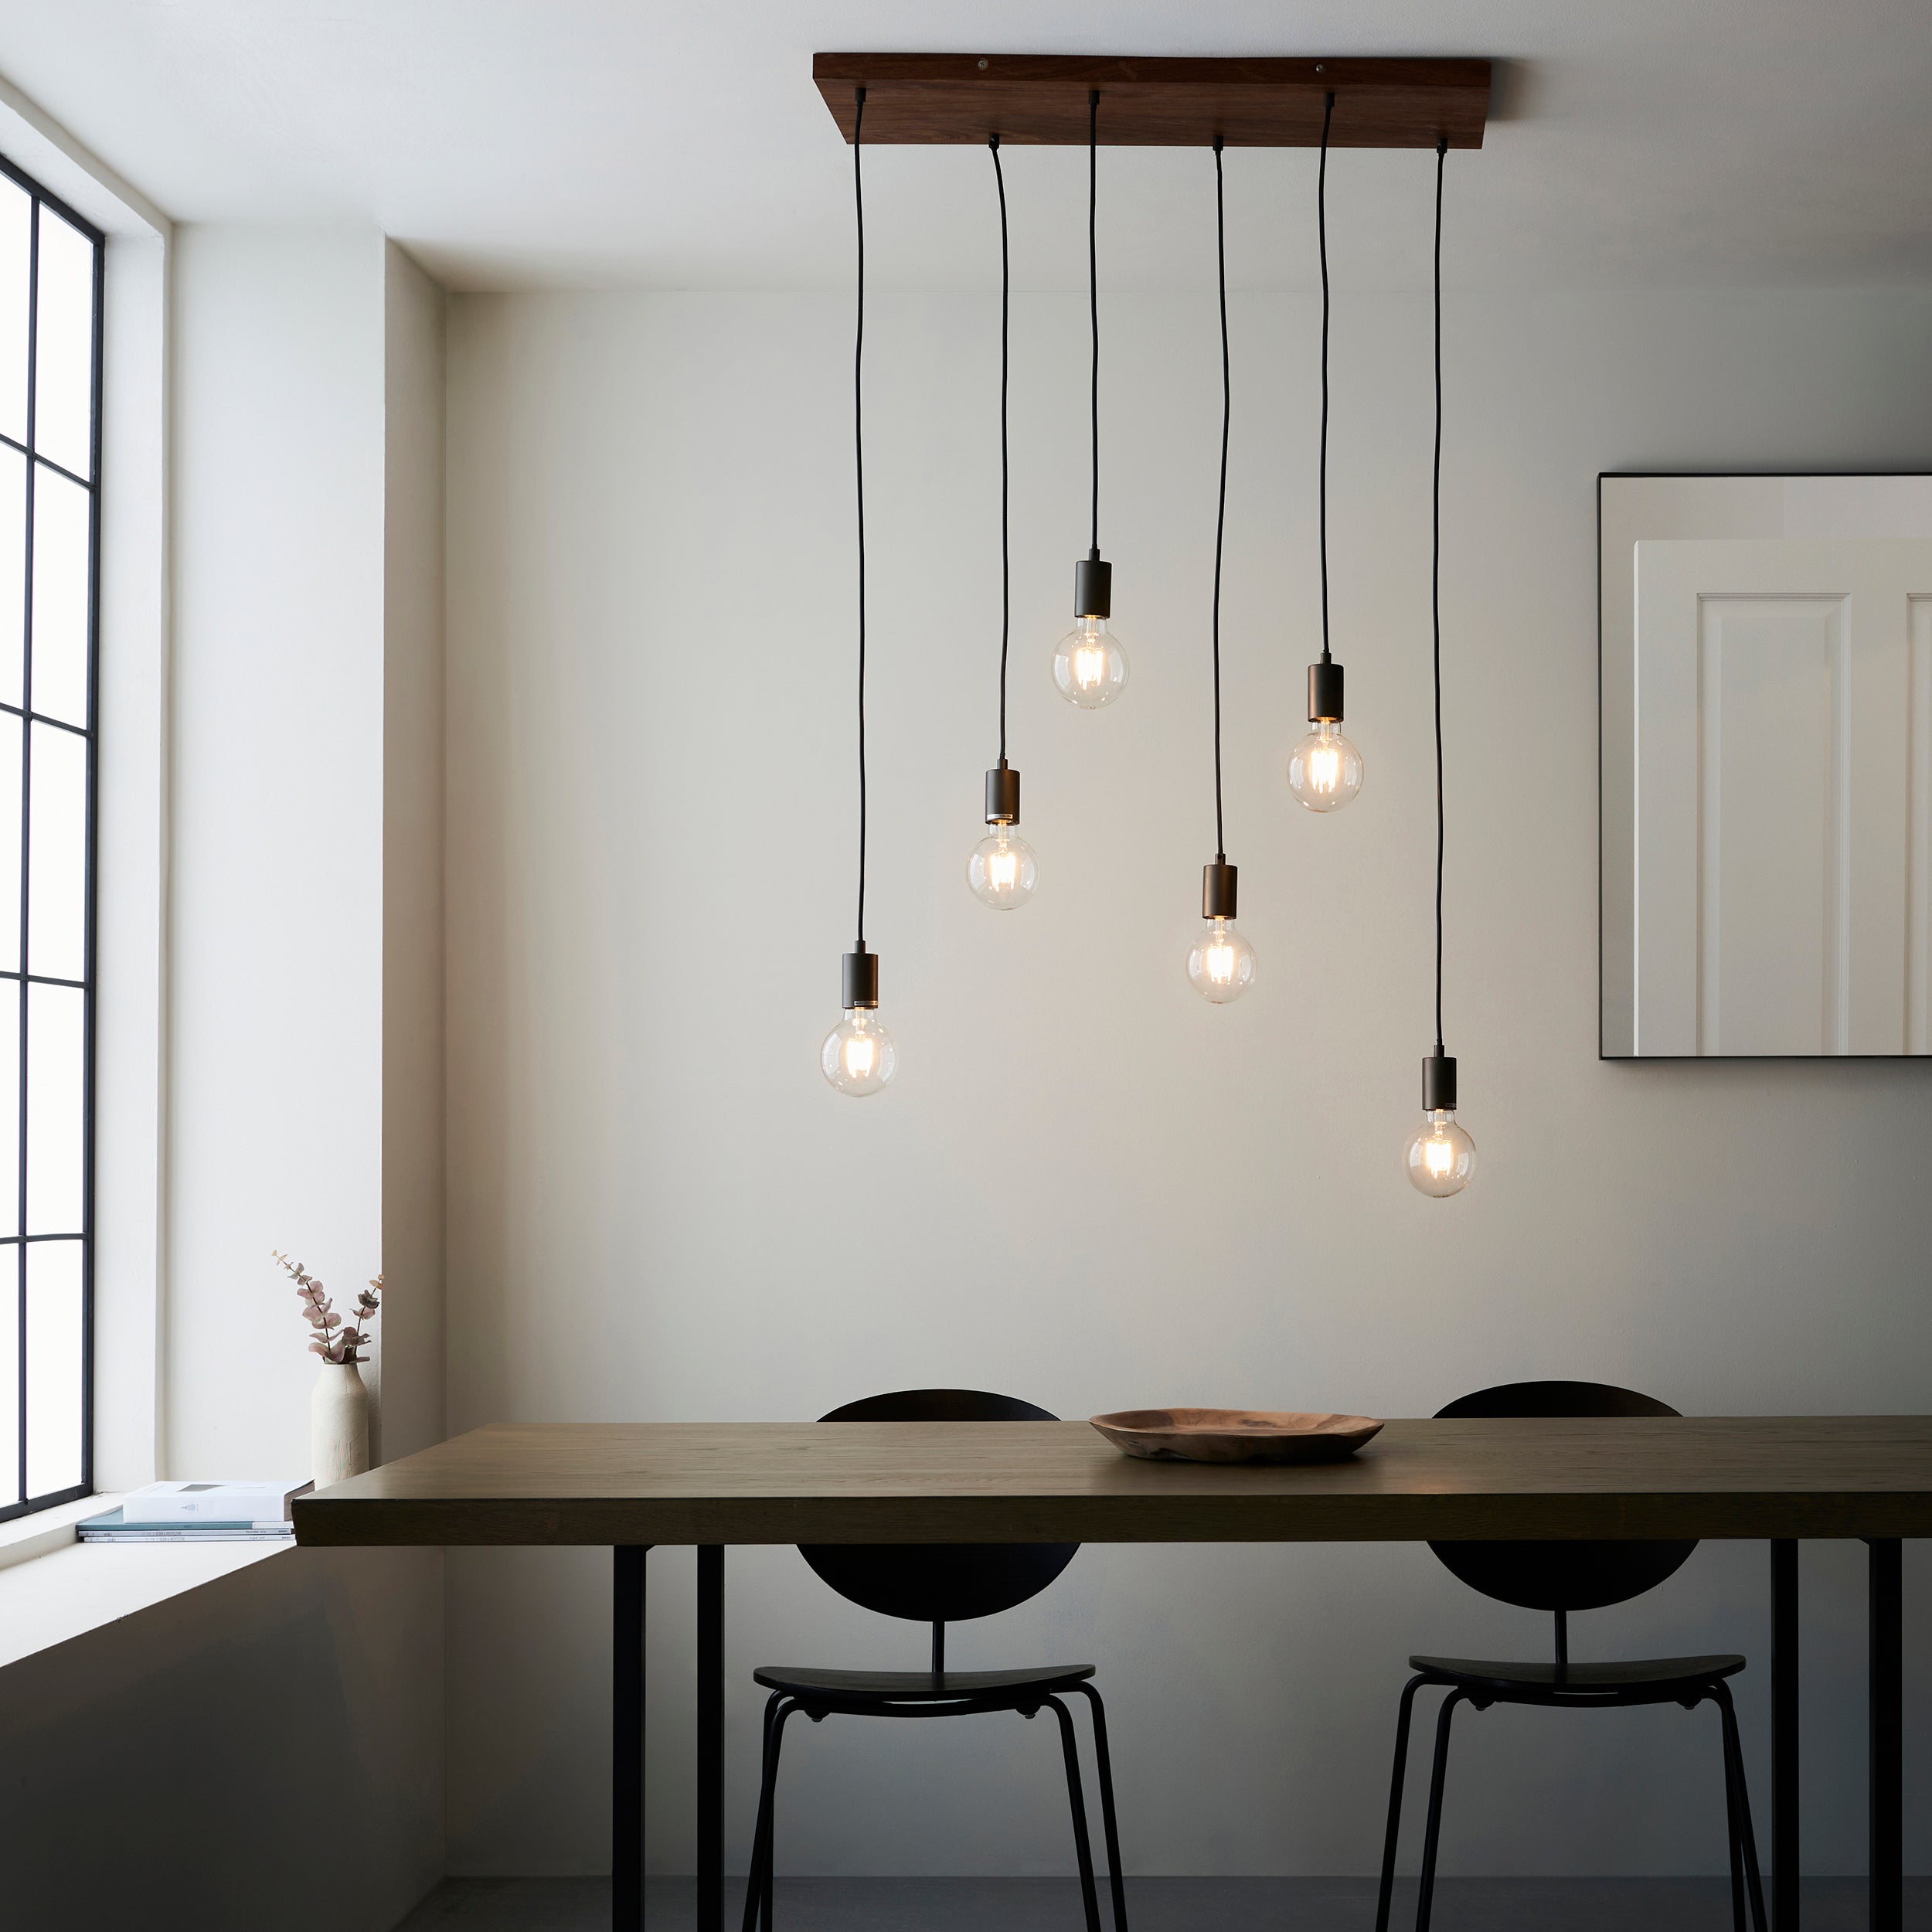 Stellan 6 Light Pendant. Oak Stained Plywood & Anthracite Finish